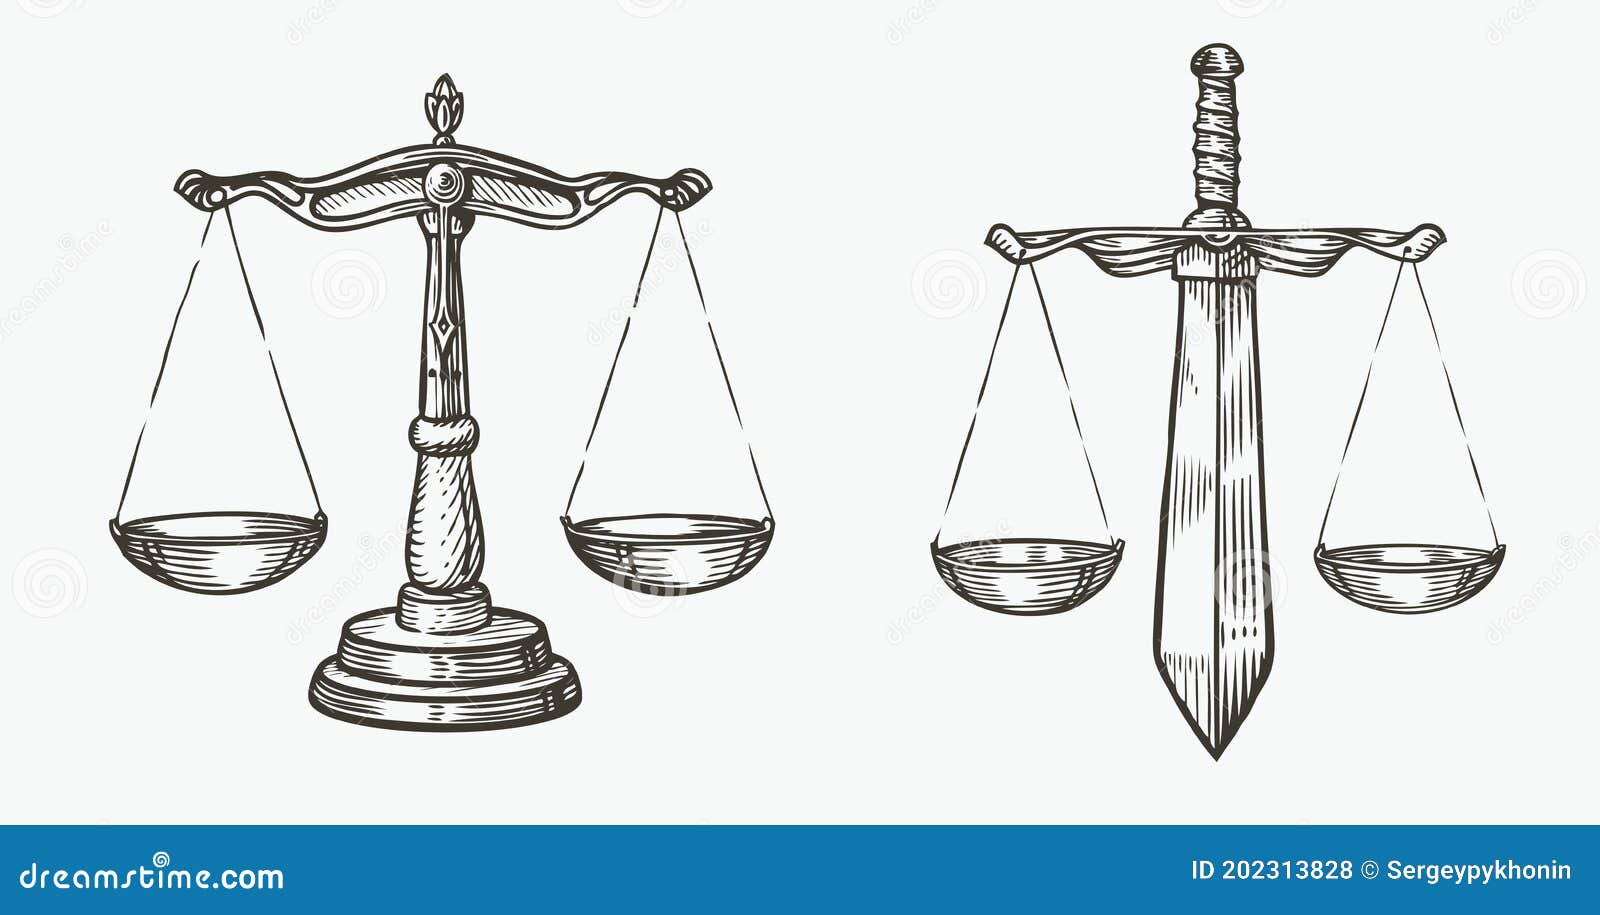 scales of justice sketch. jurisdiction, equity   